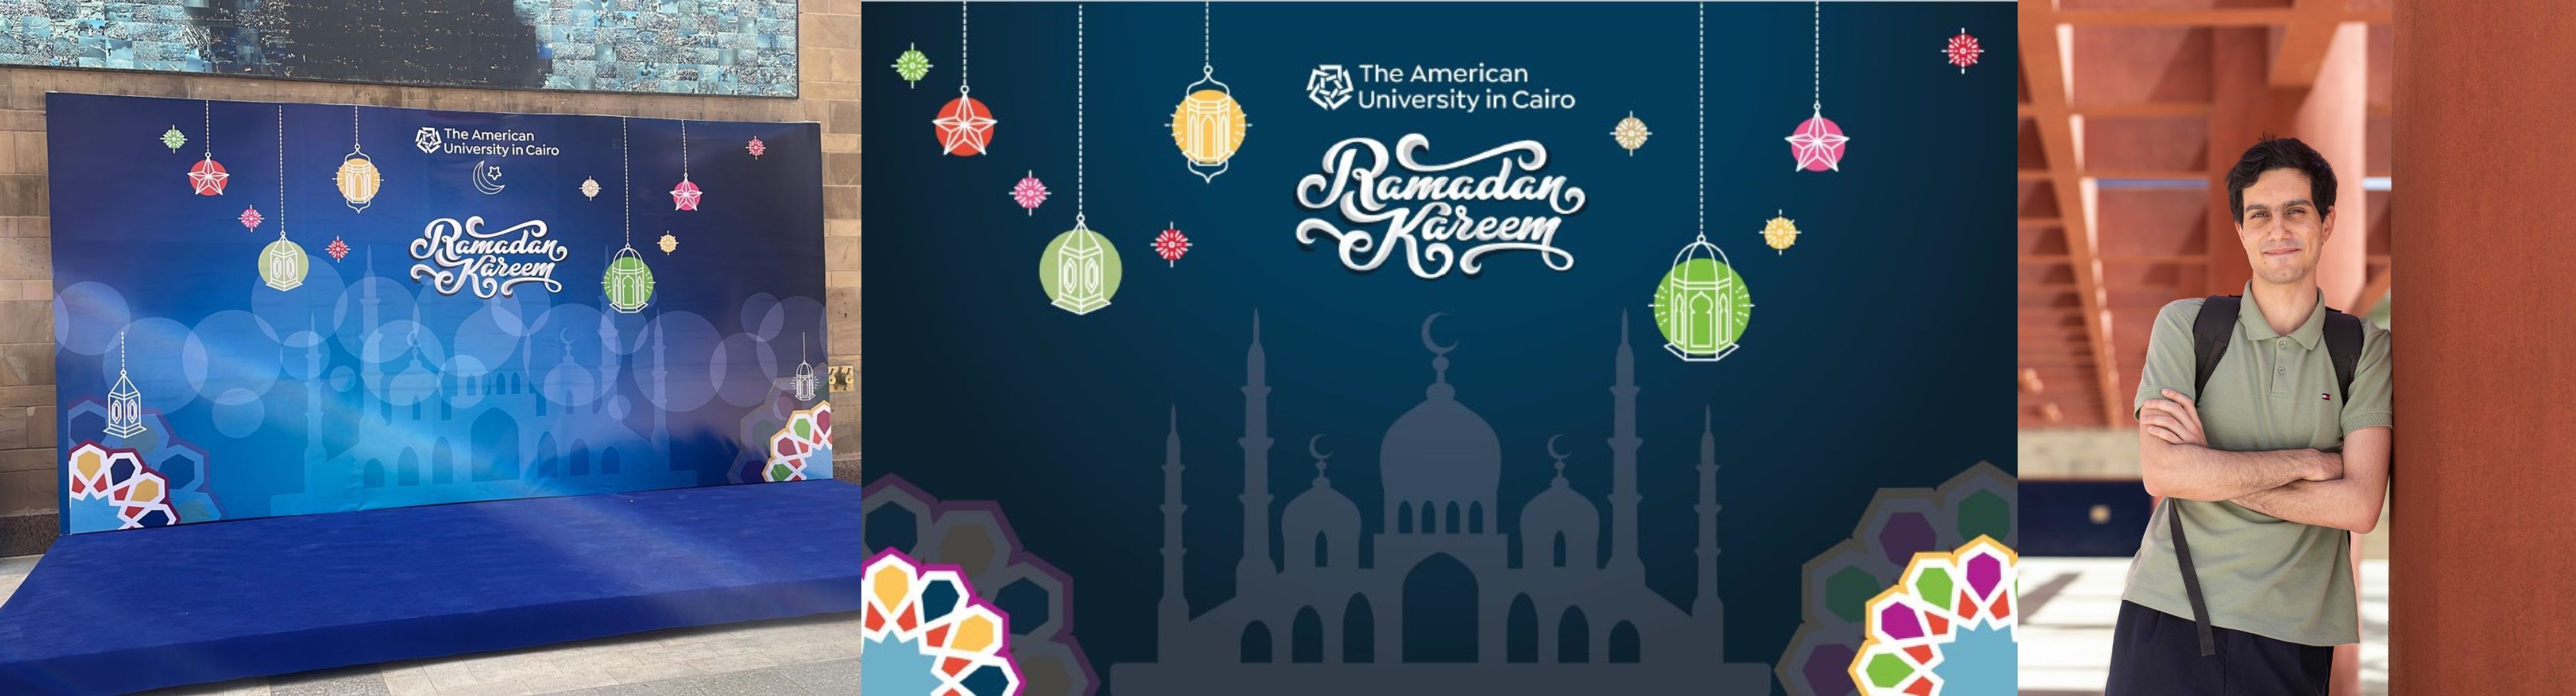 On the far right, a photo of Youssef Anwar smiling and leaning against a wall. On the far left, the original design of a photo opportunity display. The background is blue with the words "The American University in Cairo" and "Ramadan Kareem" in the top center, with pink and gold decorations of lanterns and an outline of a masjid. In the center is a photo of the display on campus with the same design.